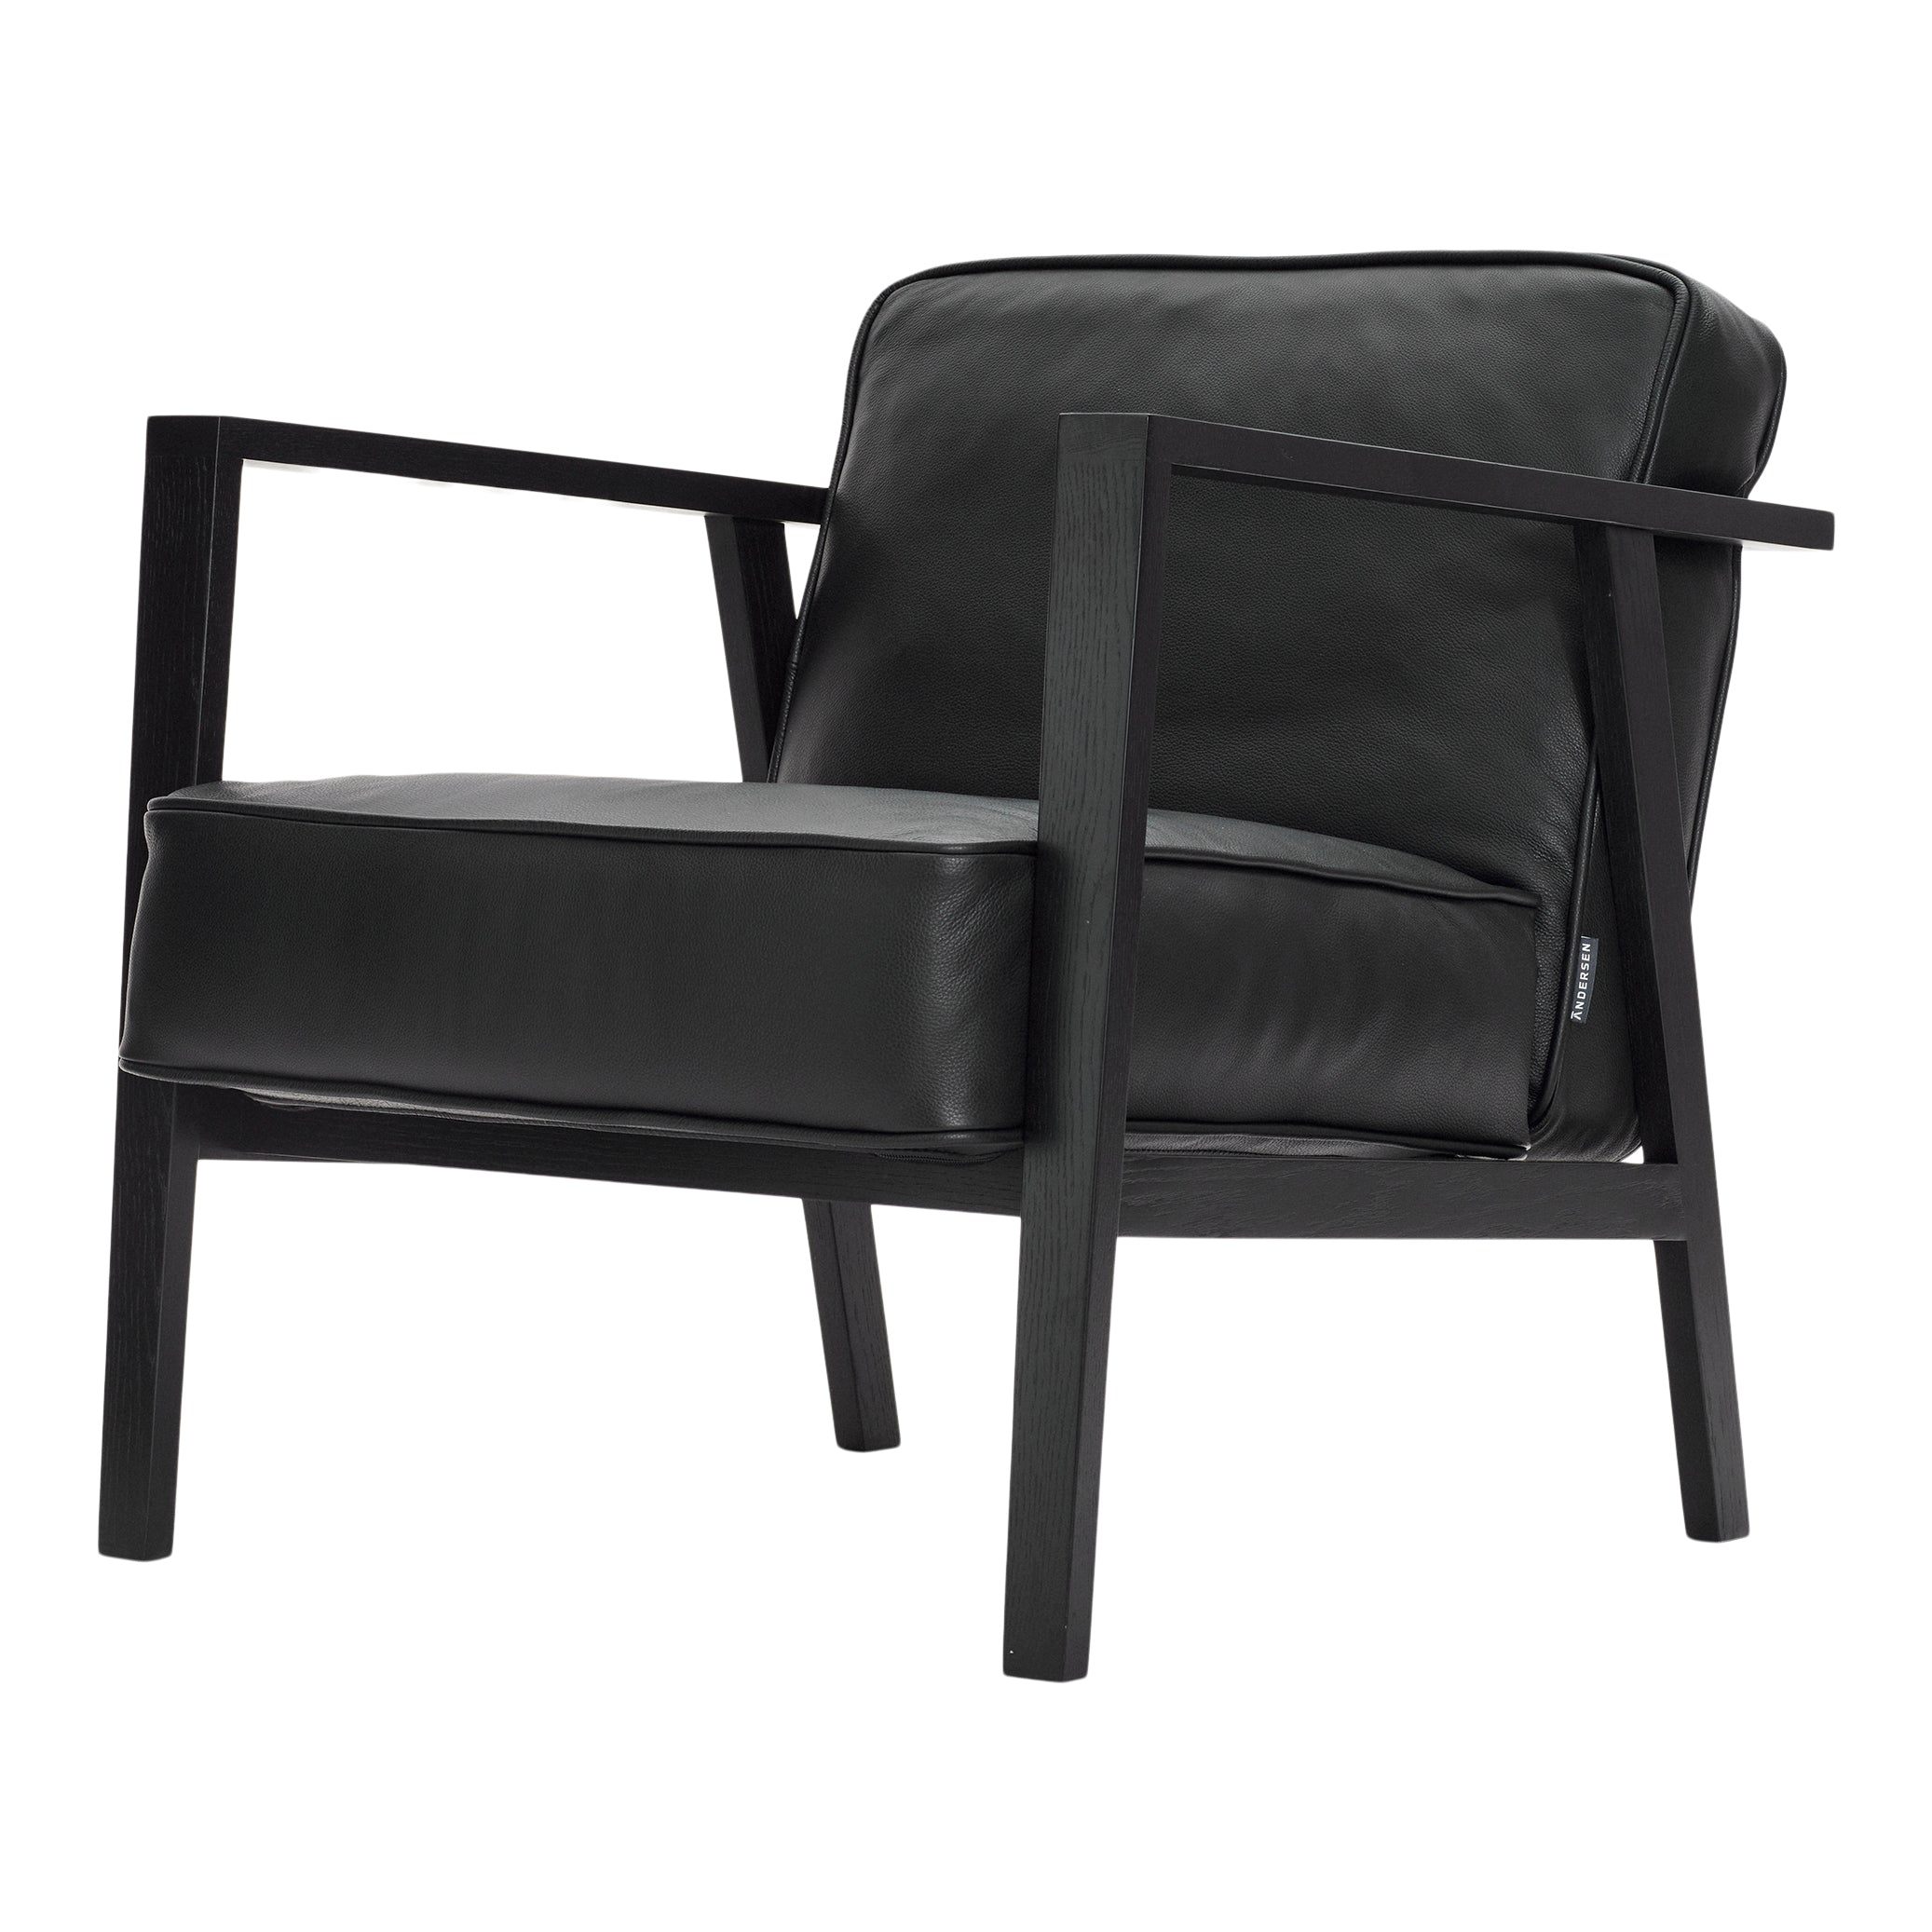 Andersen Furniture - LC1 Lounge Chair - Black Leather/Frame In Black Lacquer